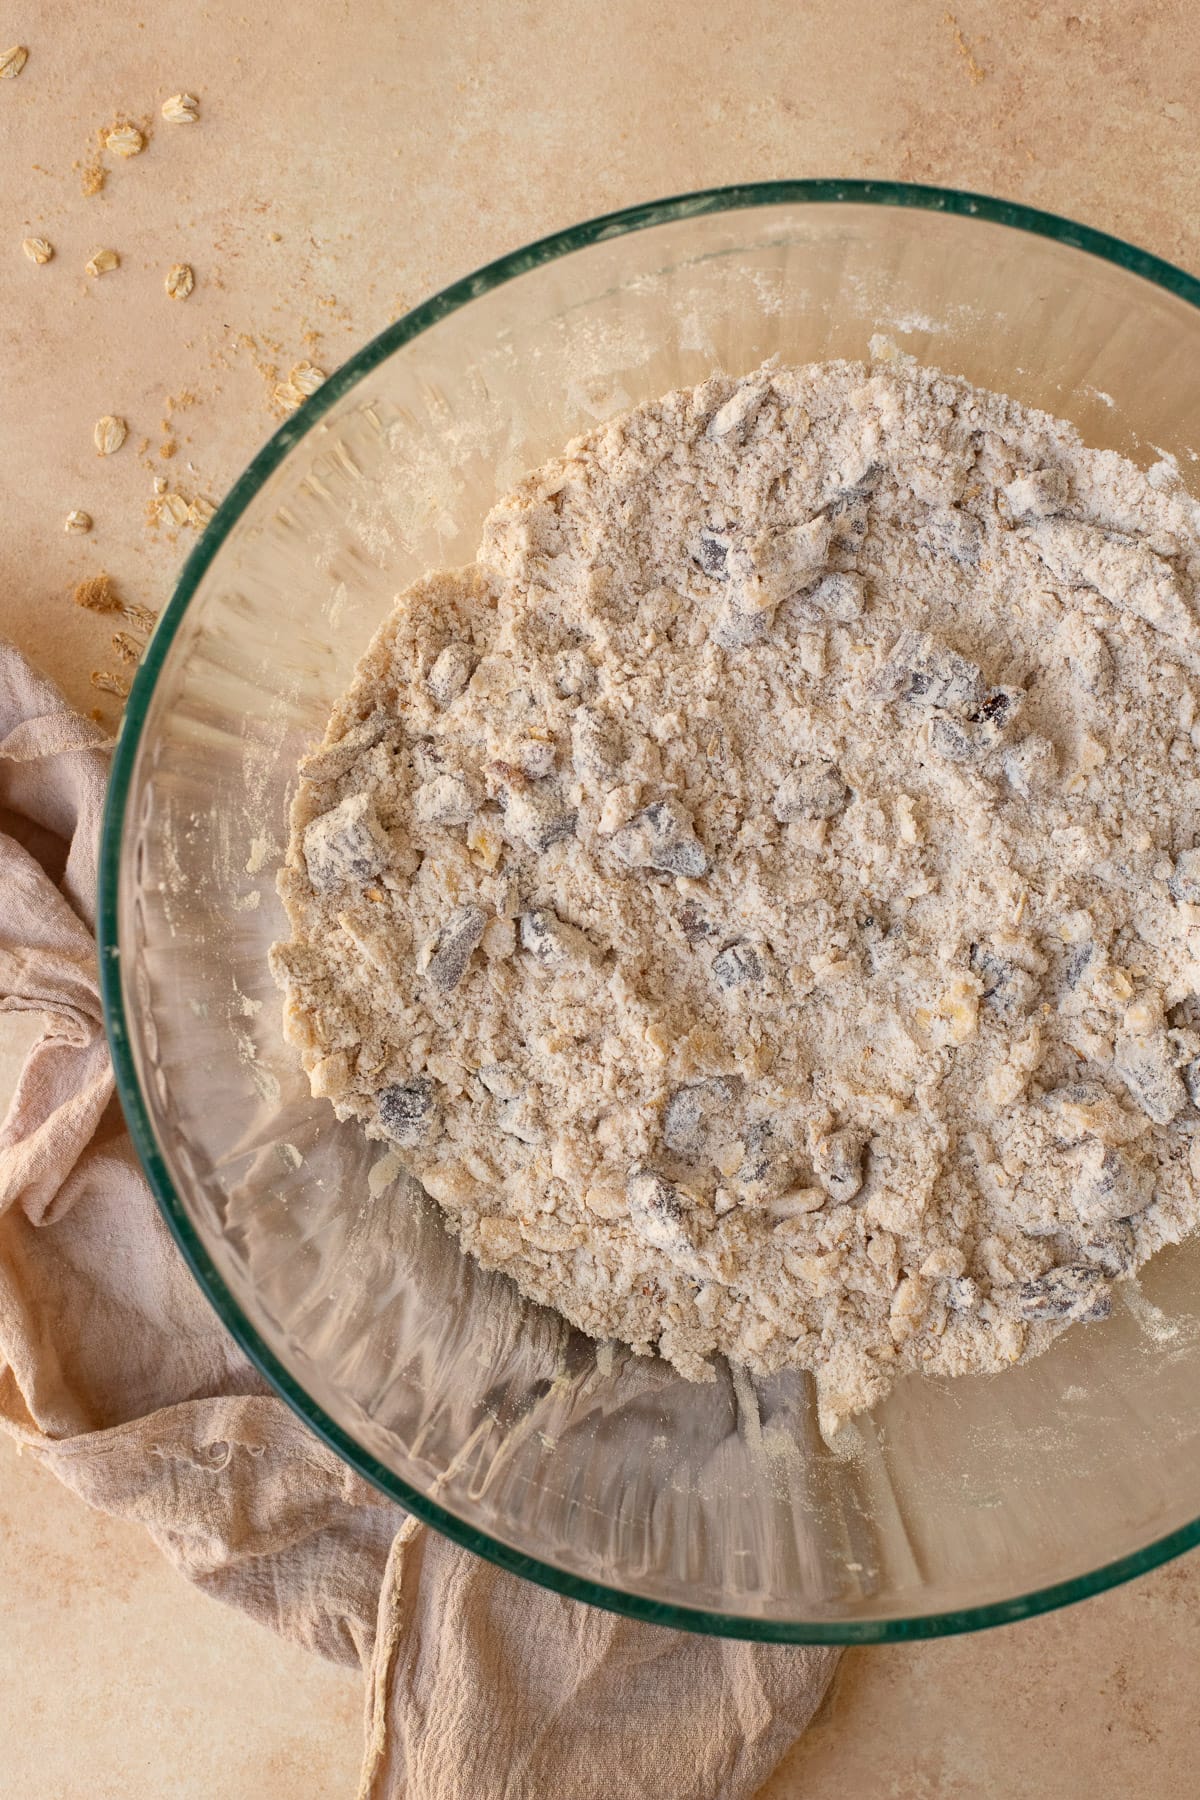 Large mixing bowl filled with dry ingredients.